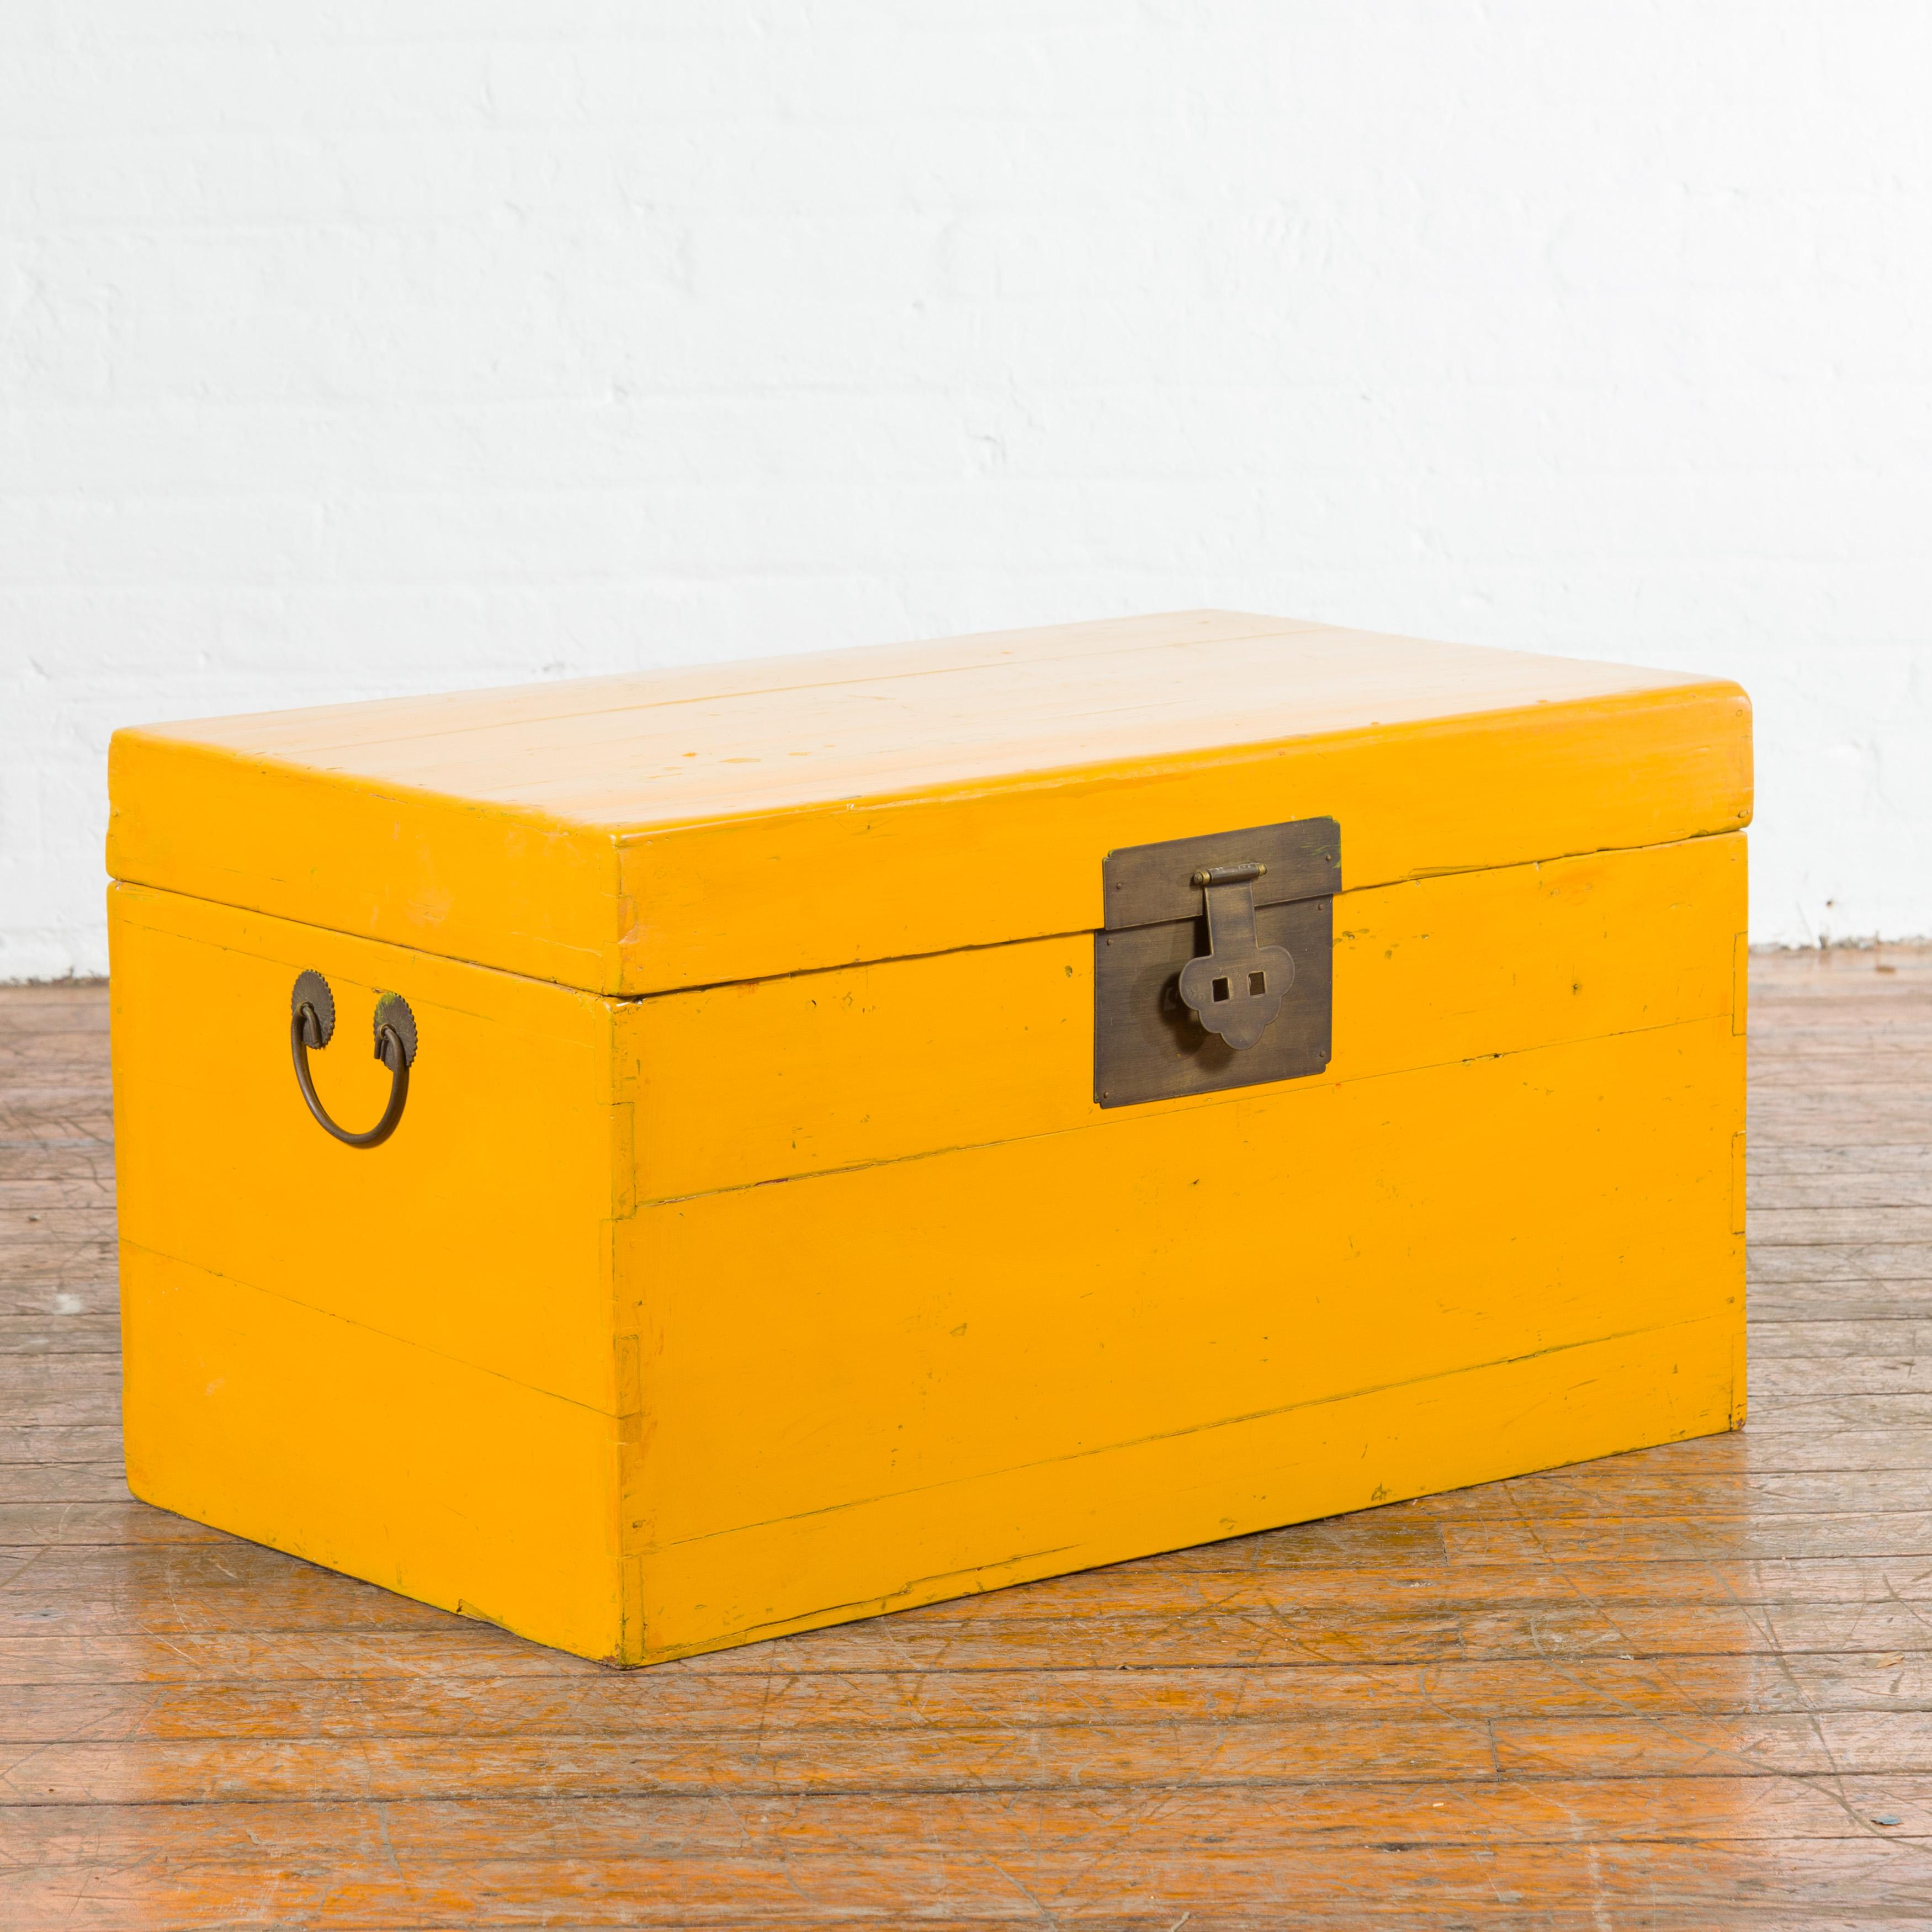 A Chinese vintage blanket chest from the mid-20th century, with yellow patina. Created in China during the midcentury period, this blanket chest draws our attention with its vivid yellow lacquer perfectly complimented by the traditional brass